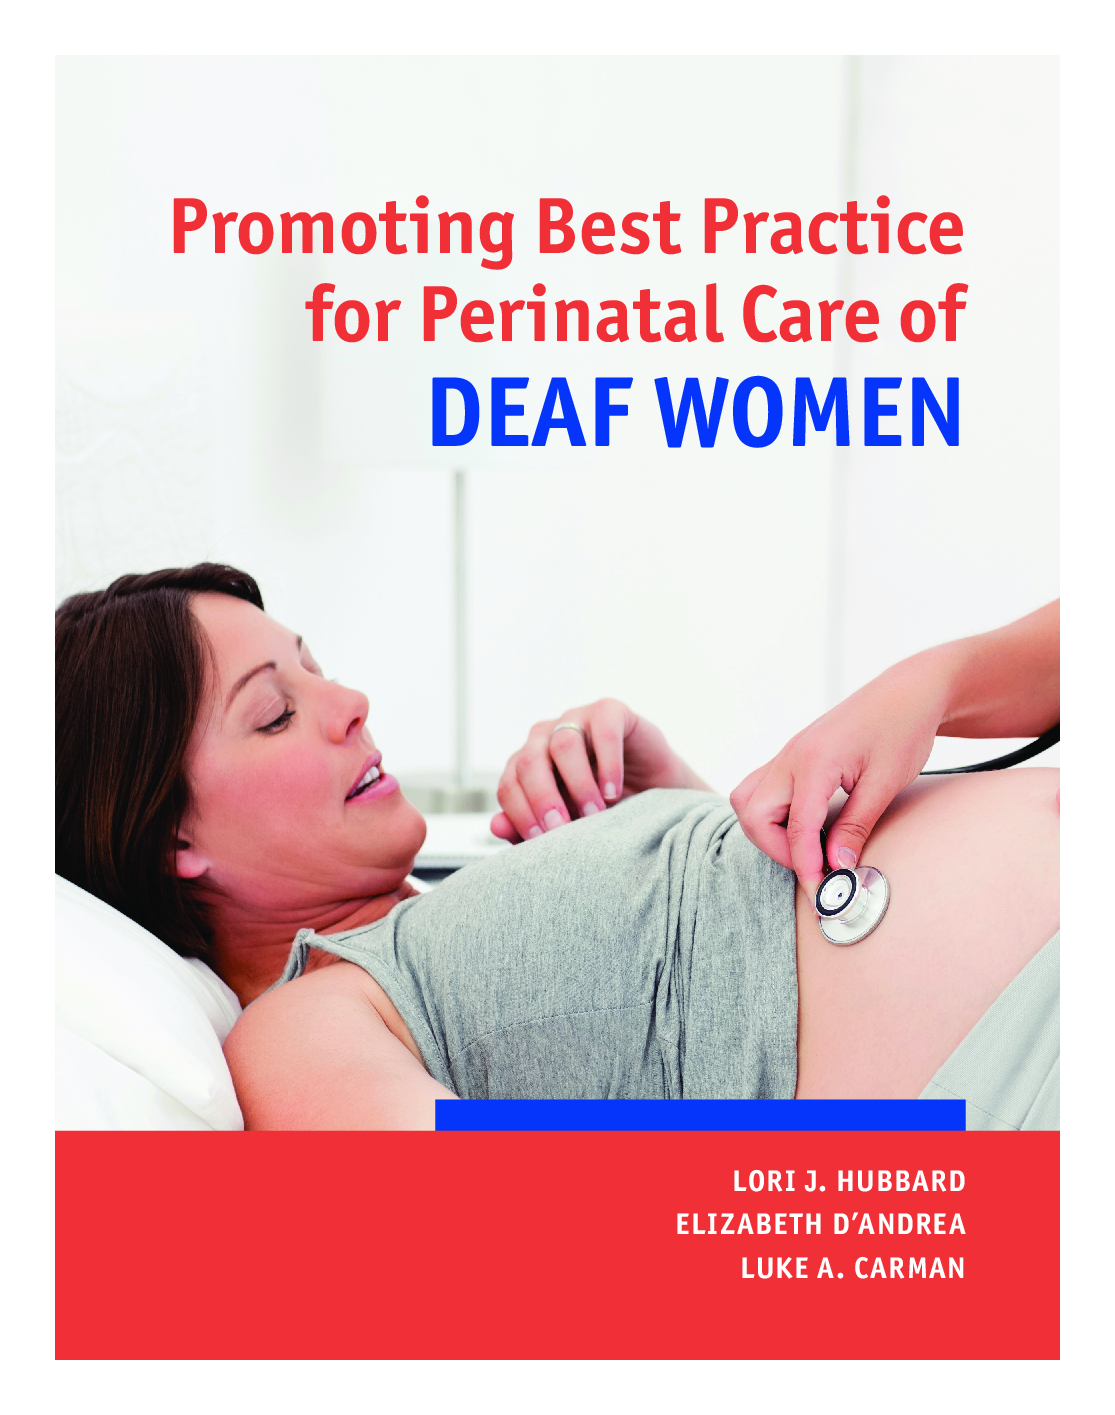 Promoting Best Practice for Perinatal Care of Deaf Women